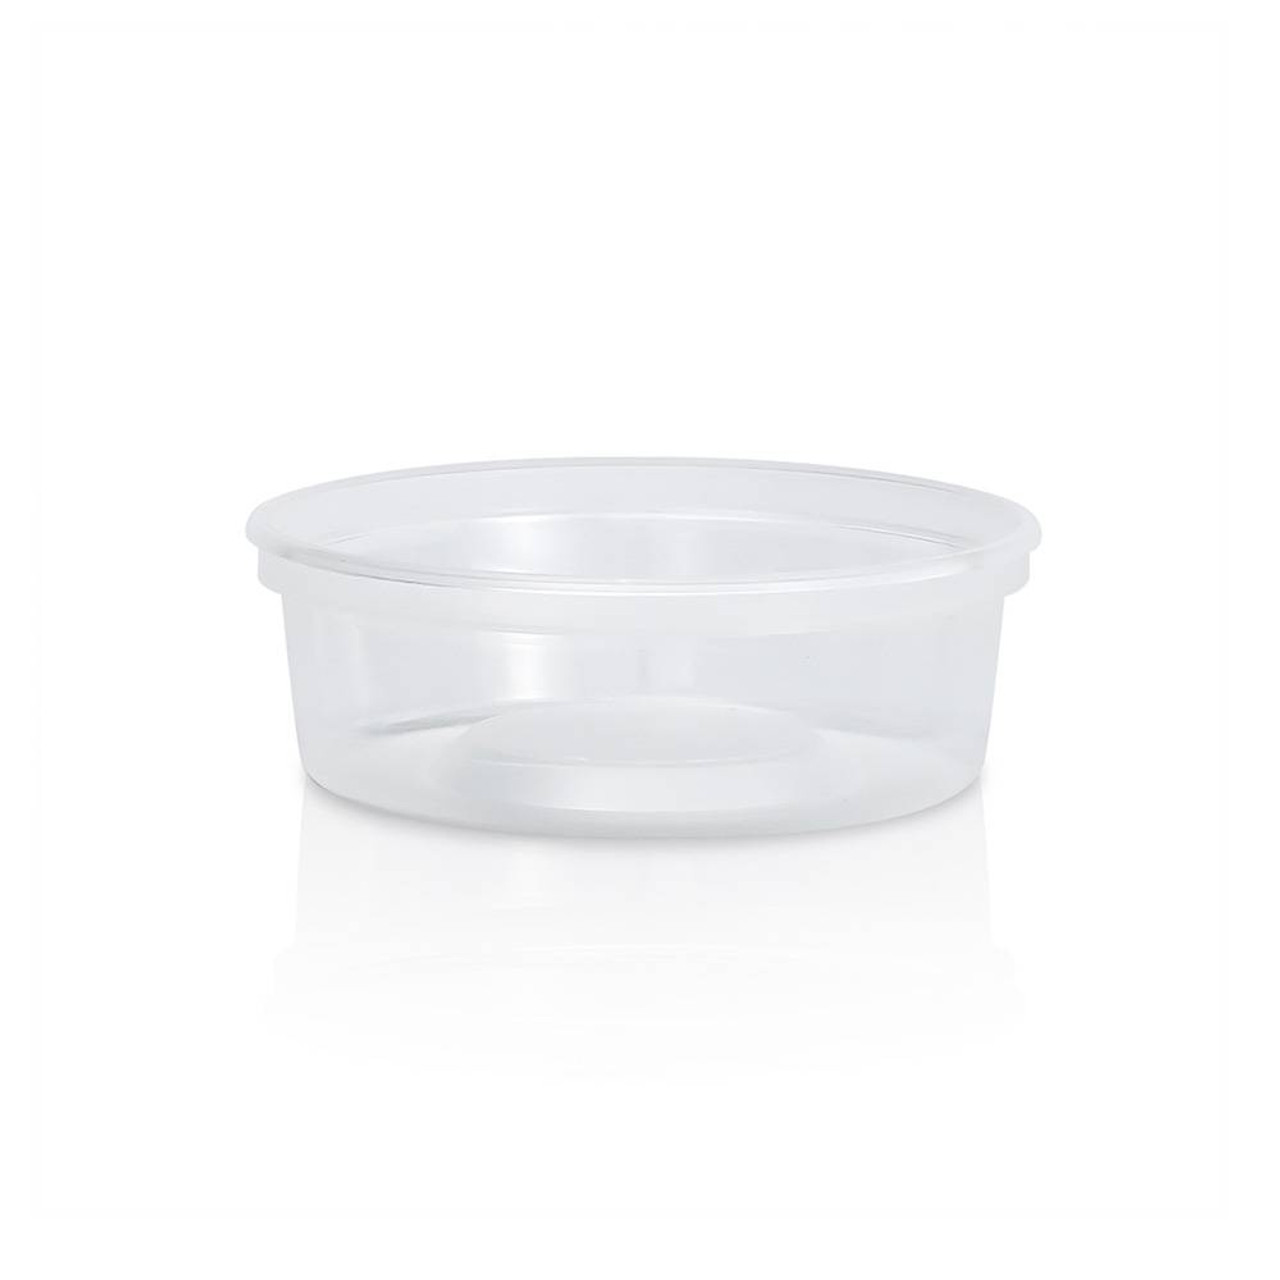 Item No 261 Round 8 oz. 1/2 Pint Plastic Container, Clear